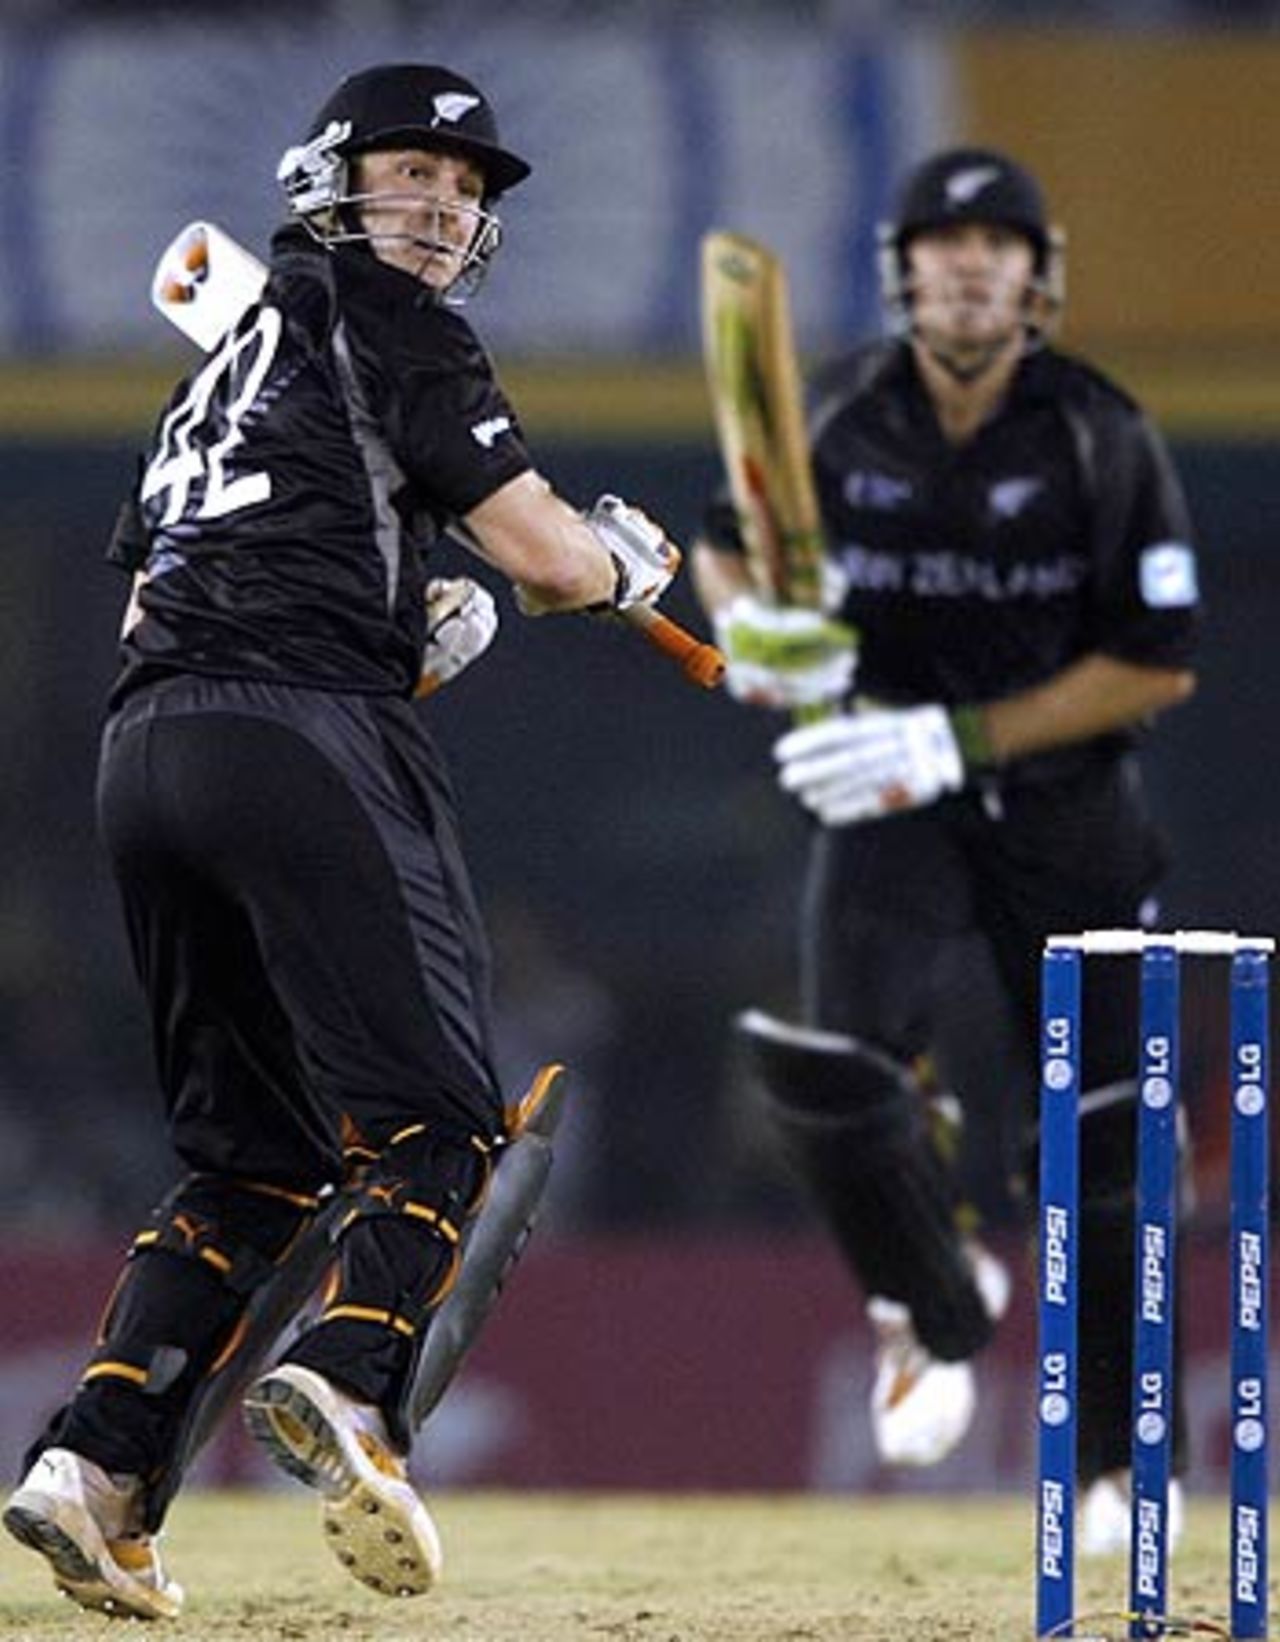 Brendon McCullum fetches a boundary during his quickfire 27 off 13 balls, New Zealand v Pakistan, 8th match, Mohali, Champions Trophy, October 25, 2006